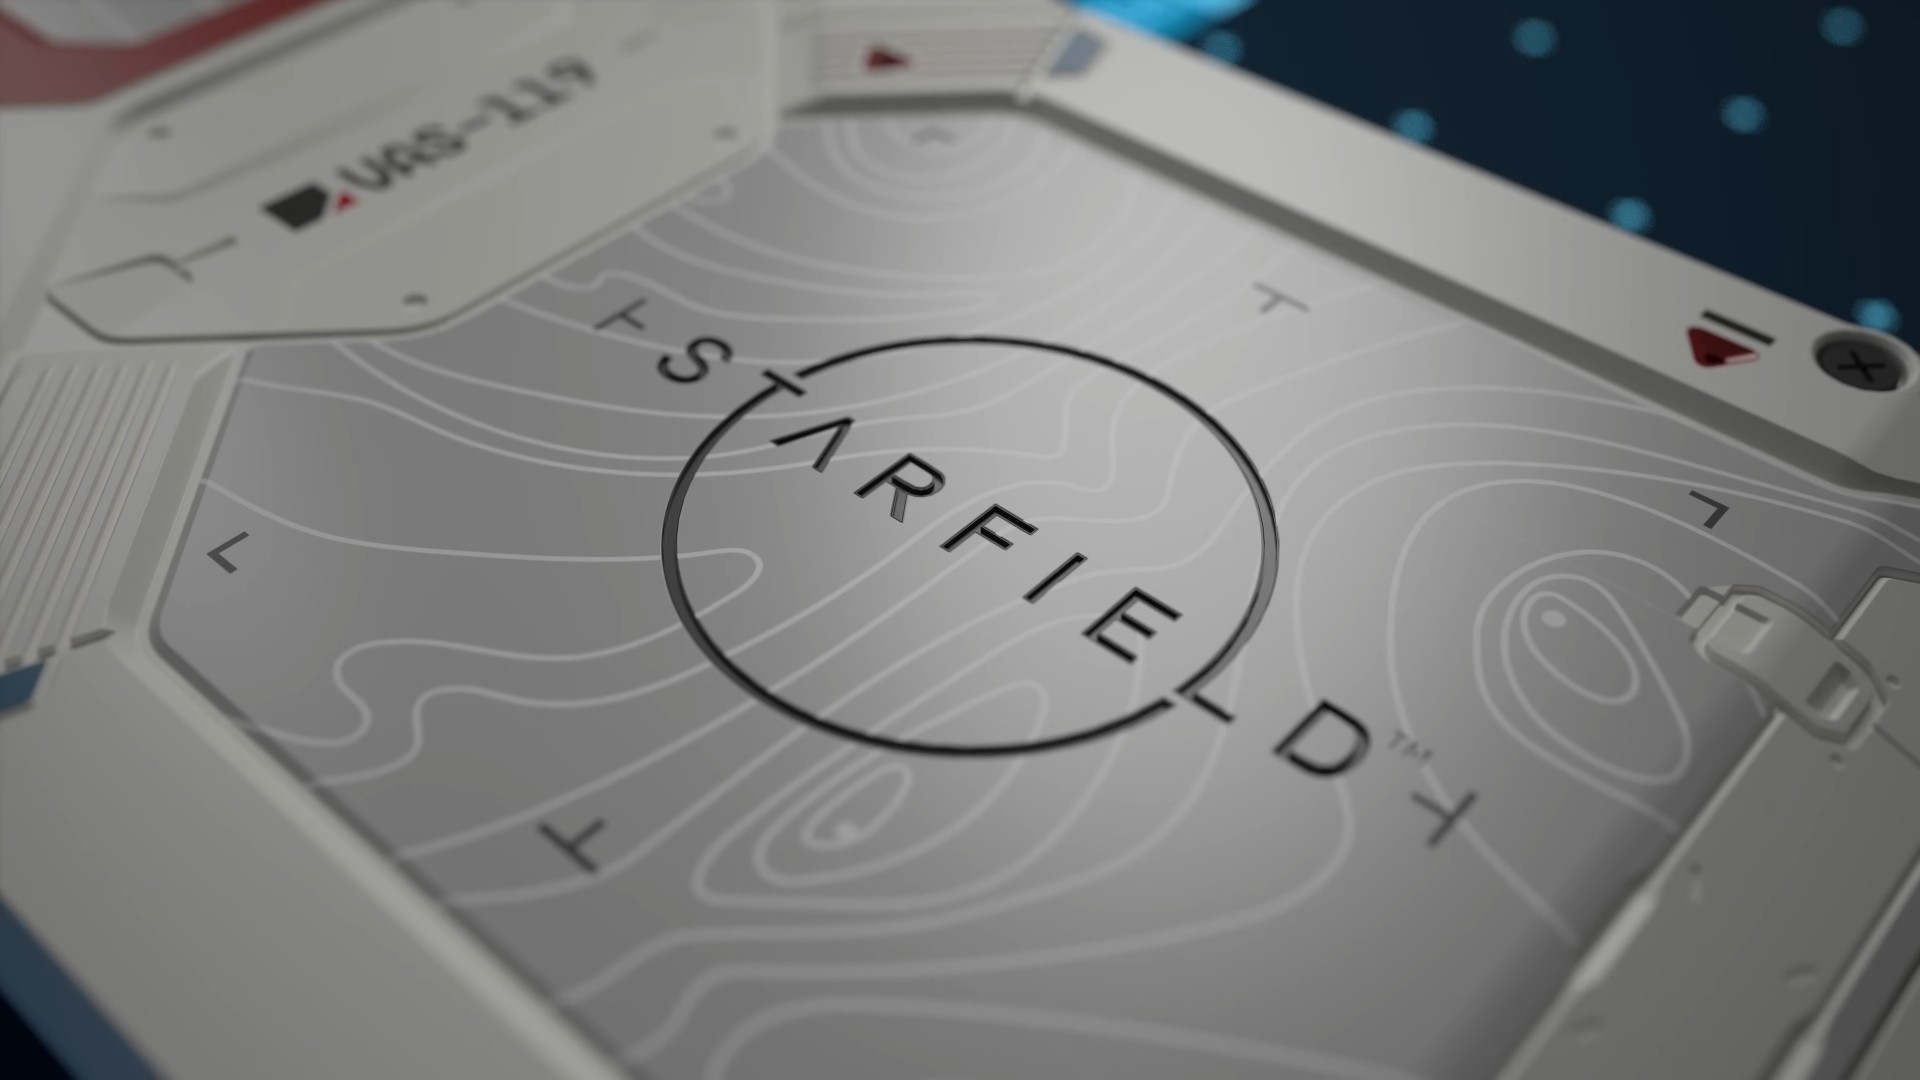 AMD and Starfield team up for huge Limited Edition giveaway